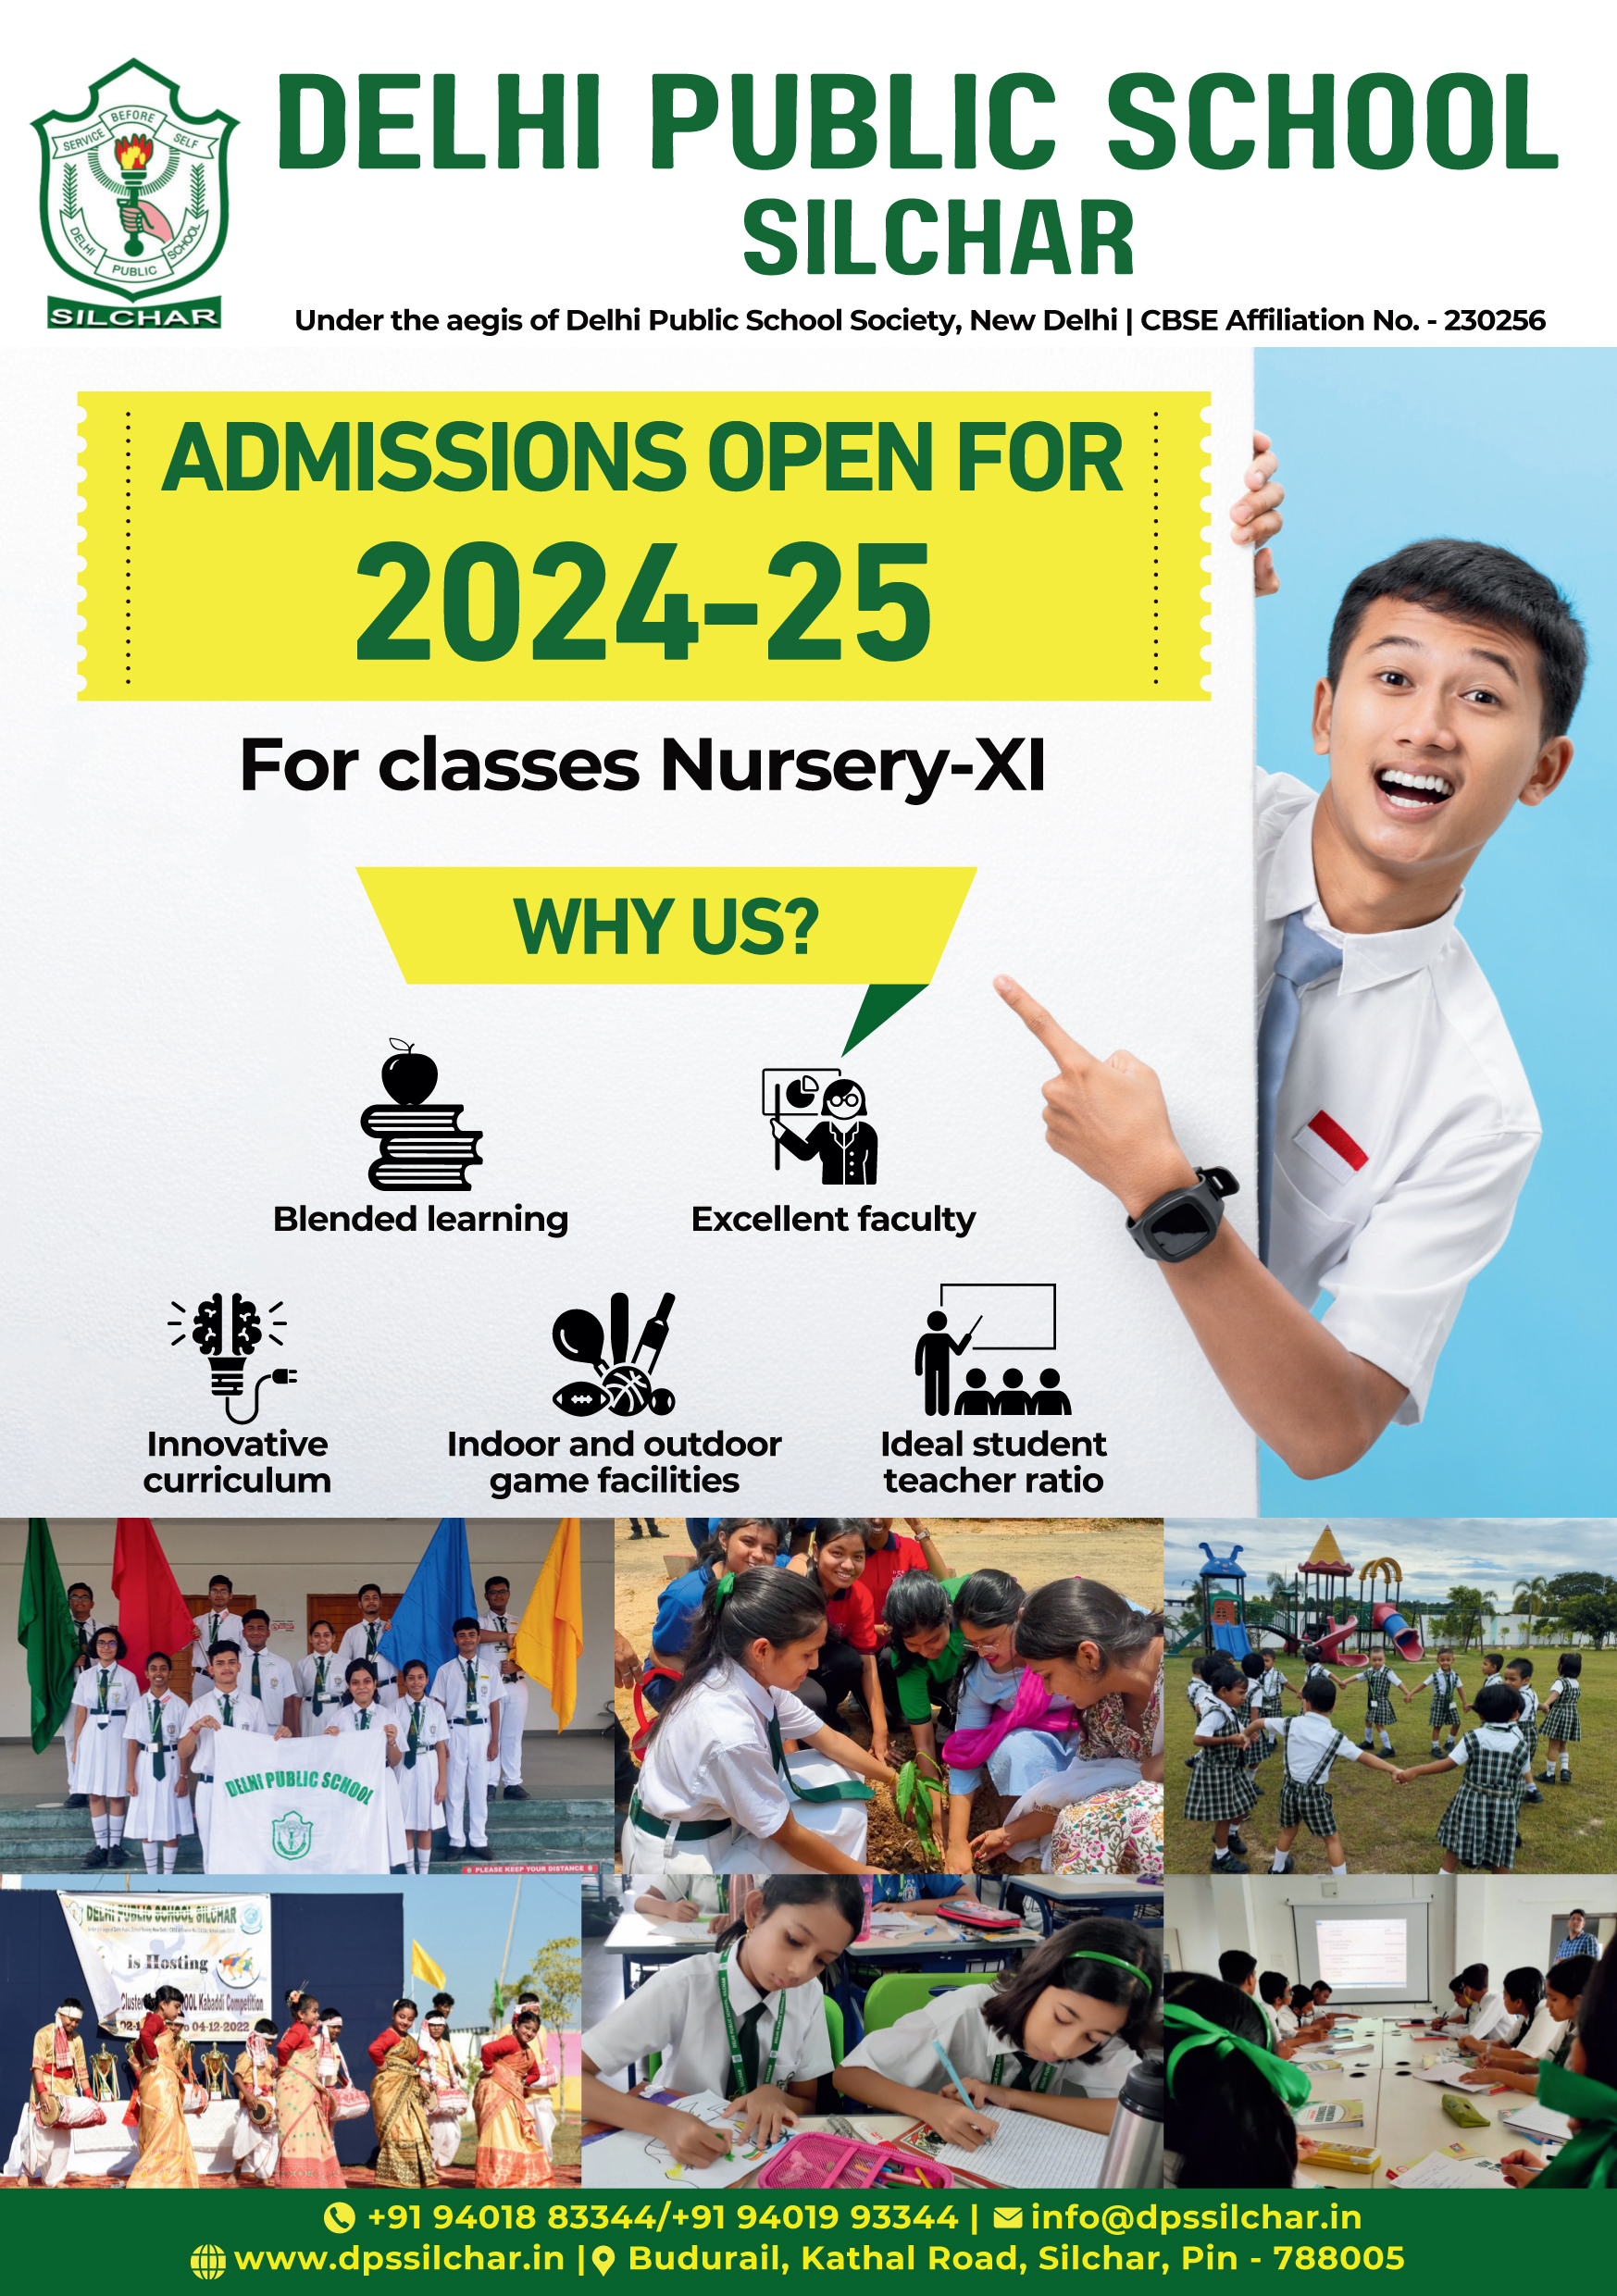 Boarding School with Extra Curricular Activities in Punjab, India